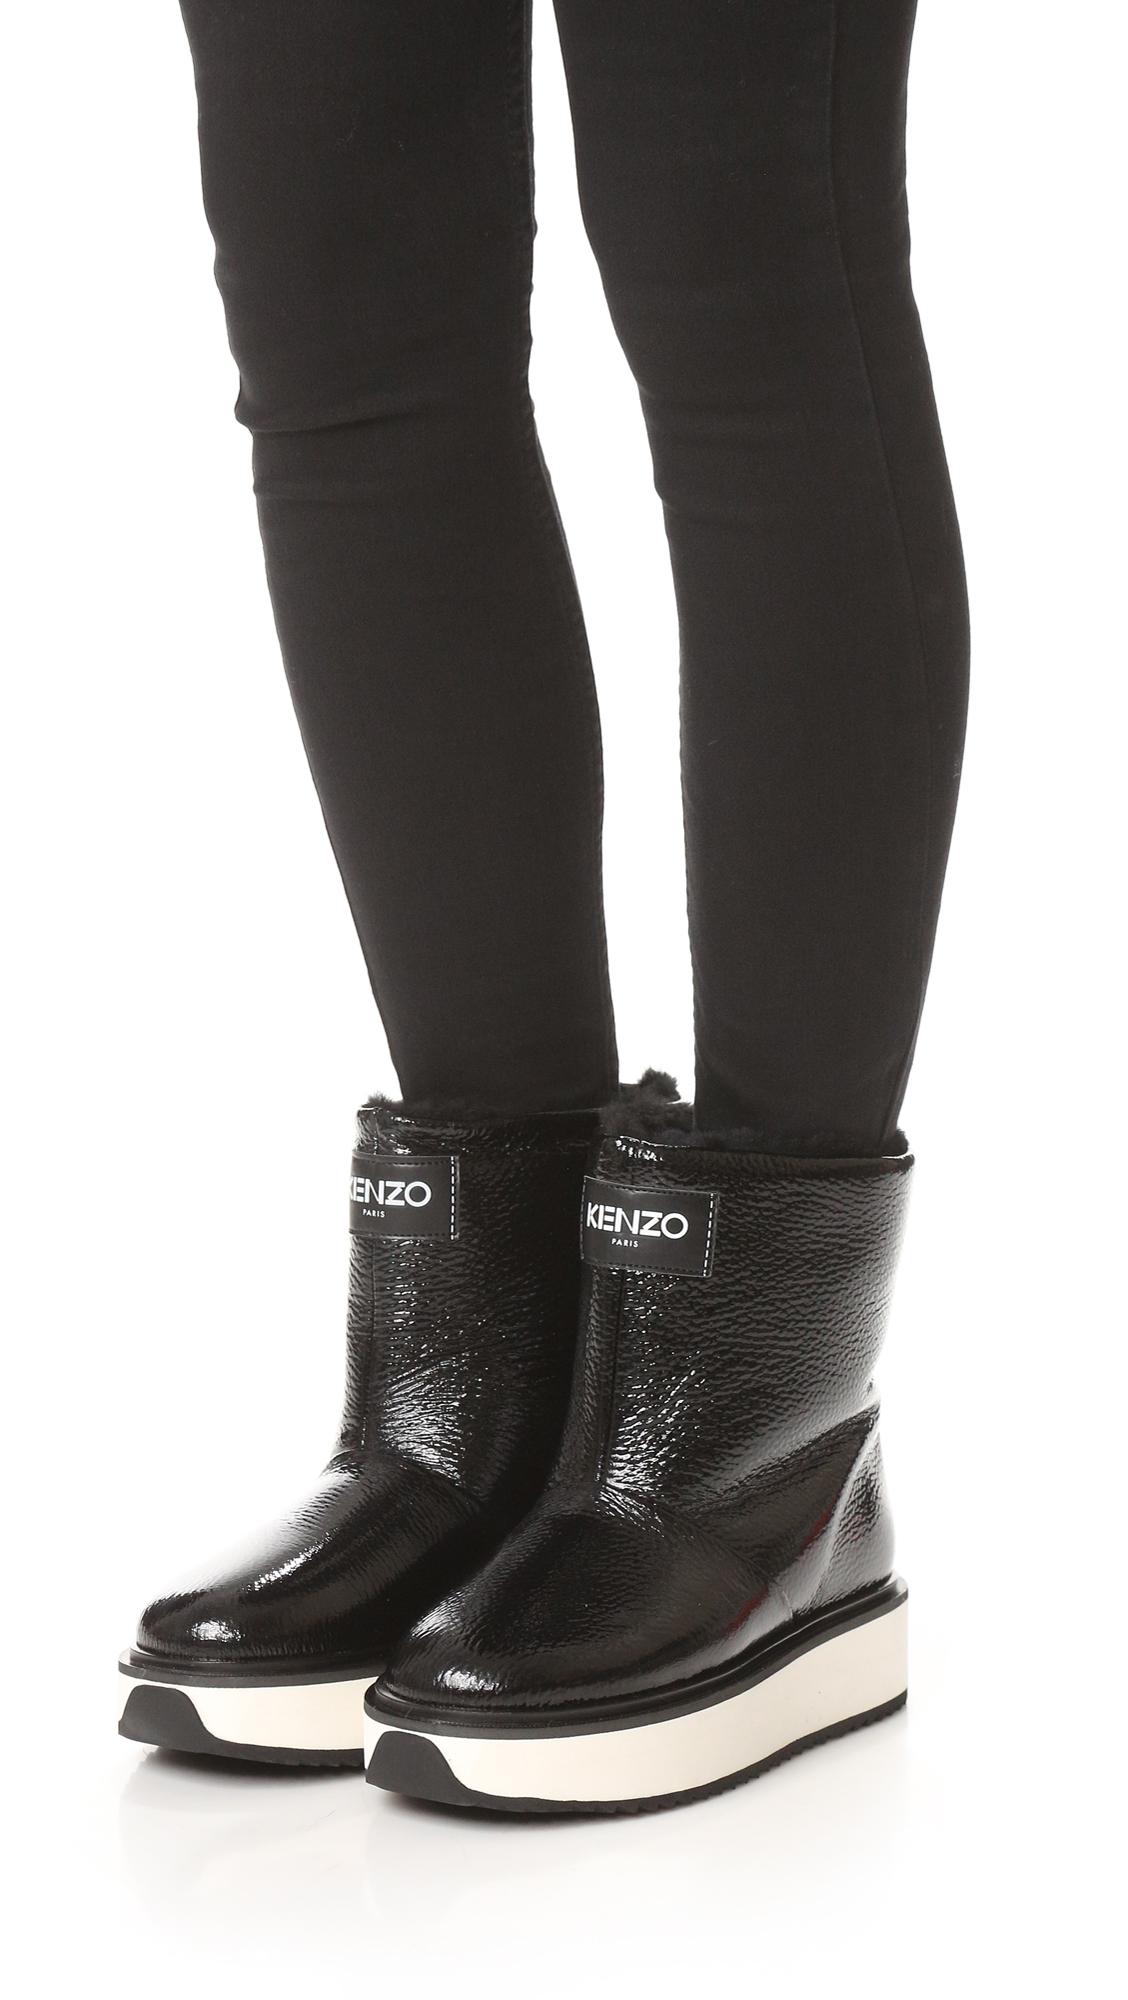 KENZO Leather Snow Boots in Black - Lyst